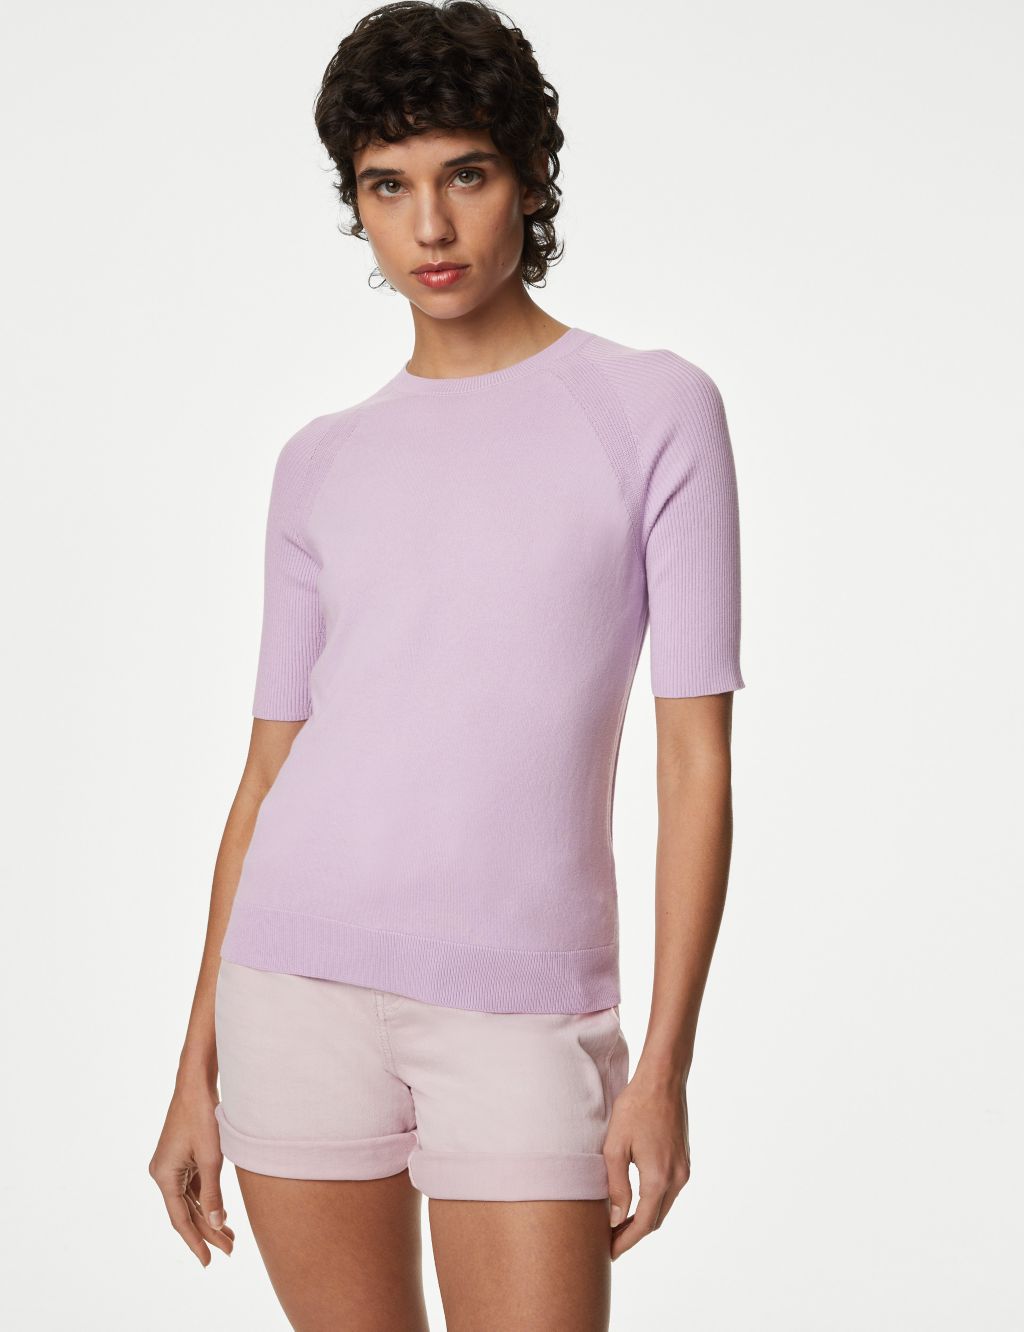 Cotton Rich Ribbed Crew Neck Knitted Top image 3